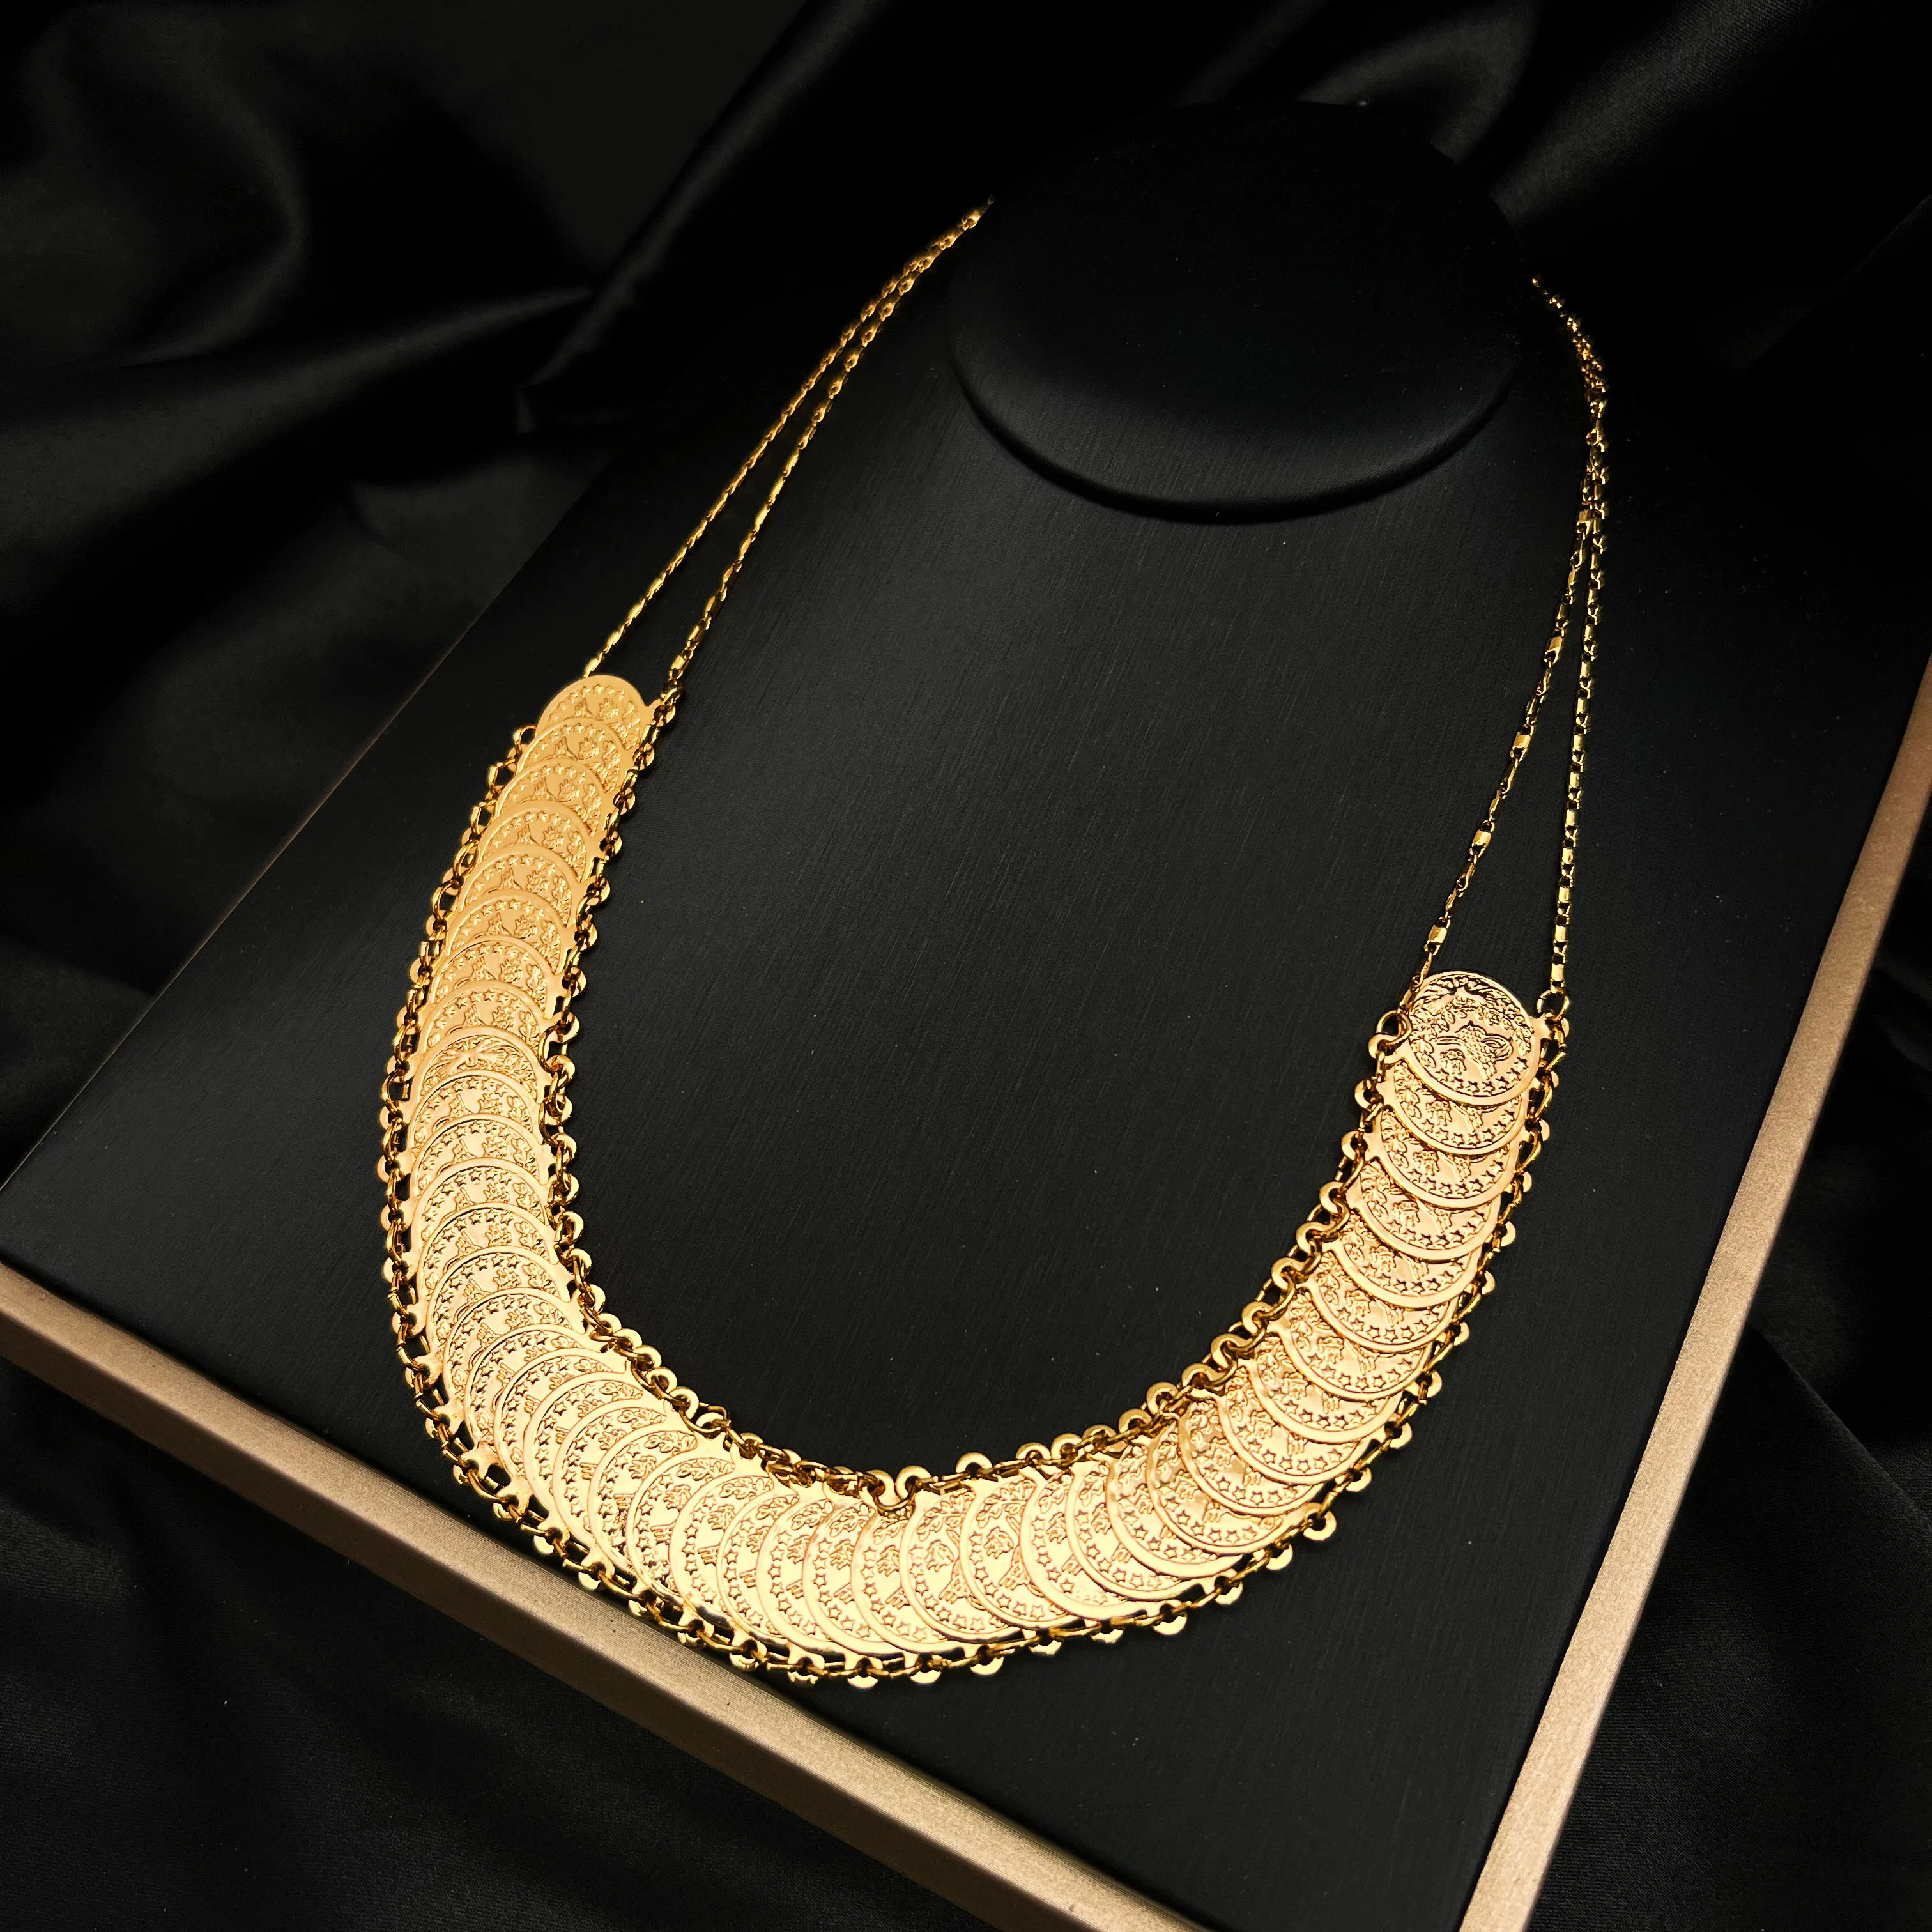 

MANDI Middle East Turkish Head Coin Necklaces Hot Sale Gold-plated Non-fading Ethnic Style Neck Chains Women's Popular Jewelry